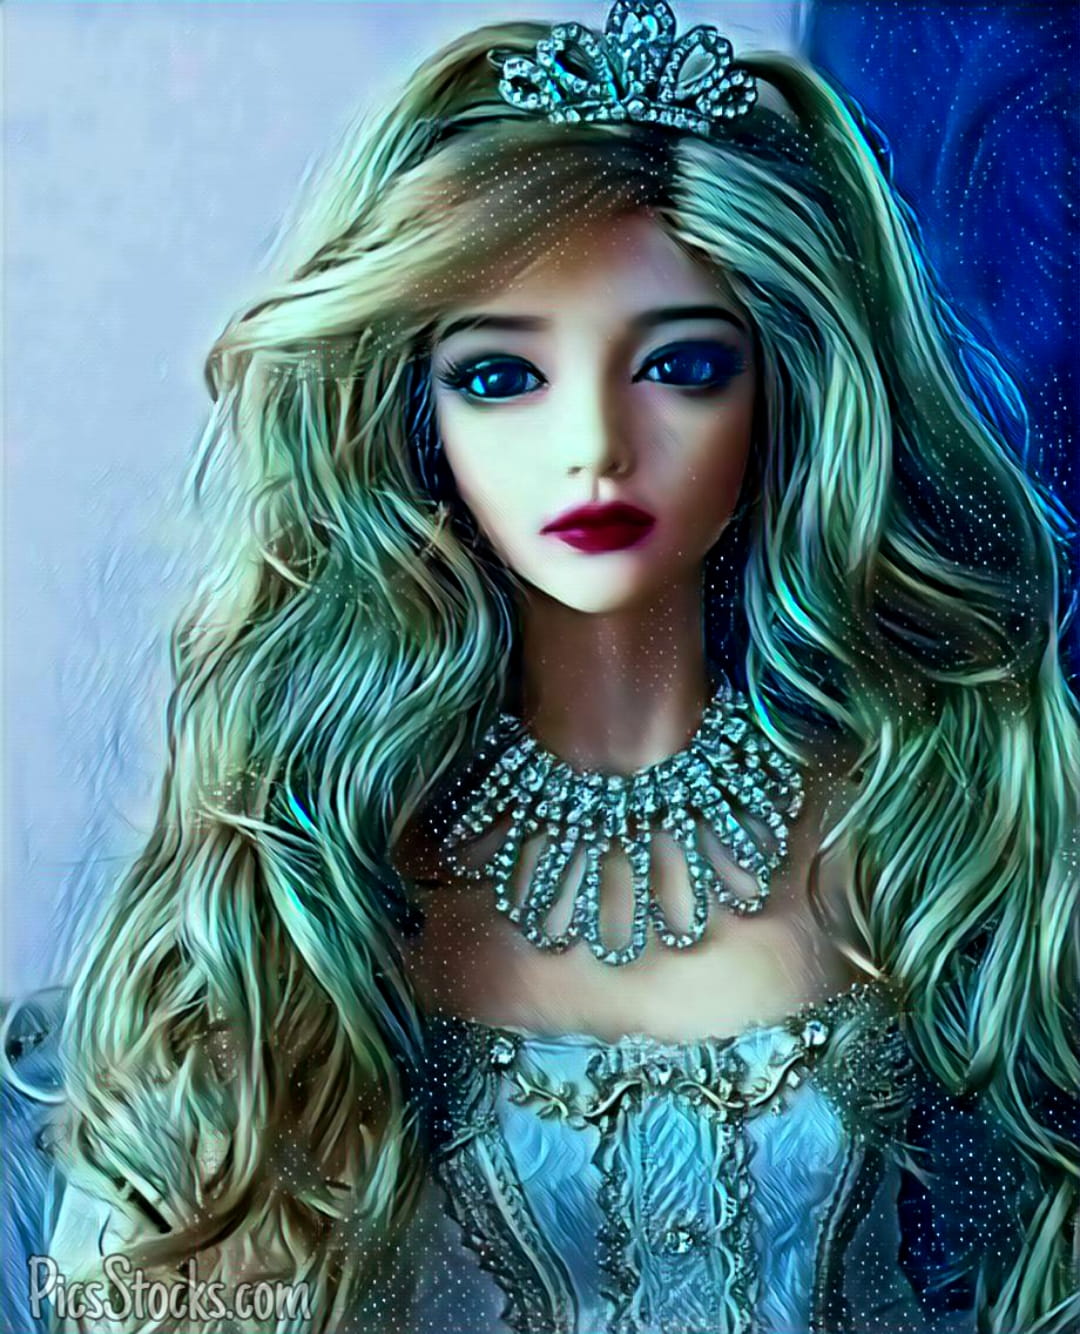 Barbie Doll Images Free Download ,barbie Doll Wallpapers - Whatsapp Dp Doll Images Hd - HD Wallpaper 